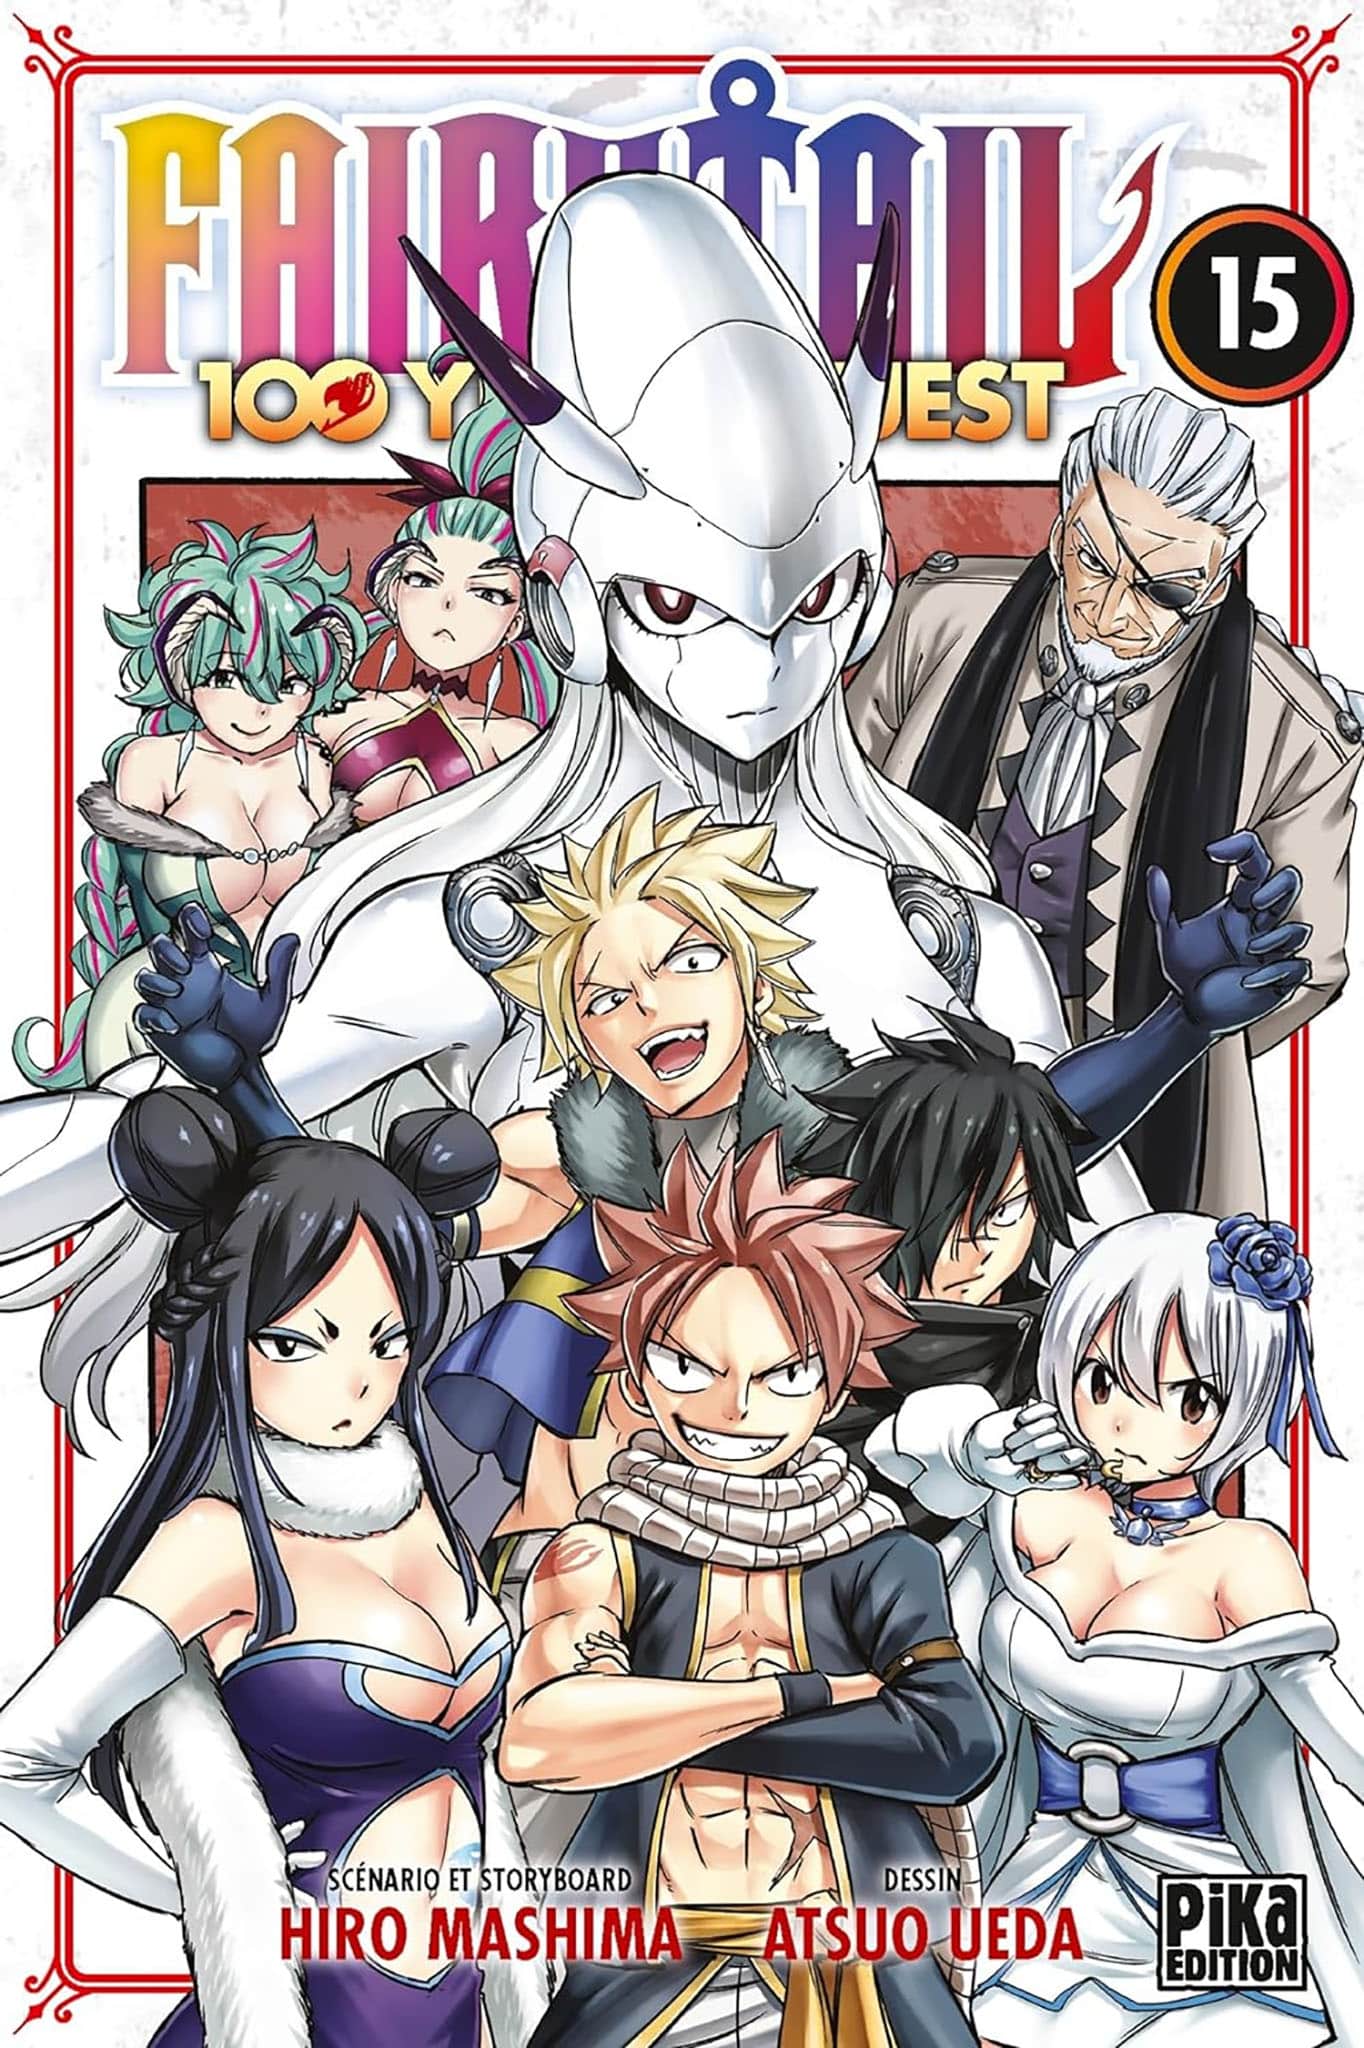 Tome 15 du manga Fairy Tail : 100 Years Quest.